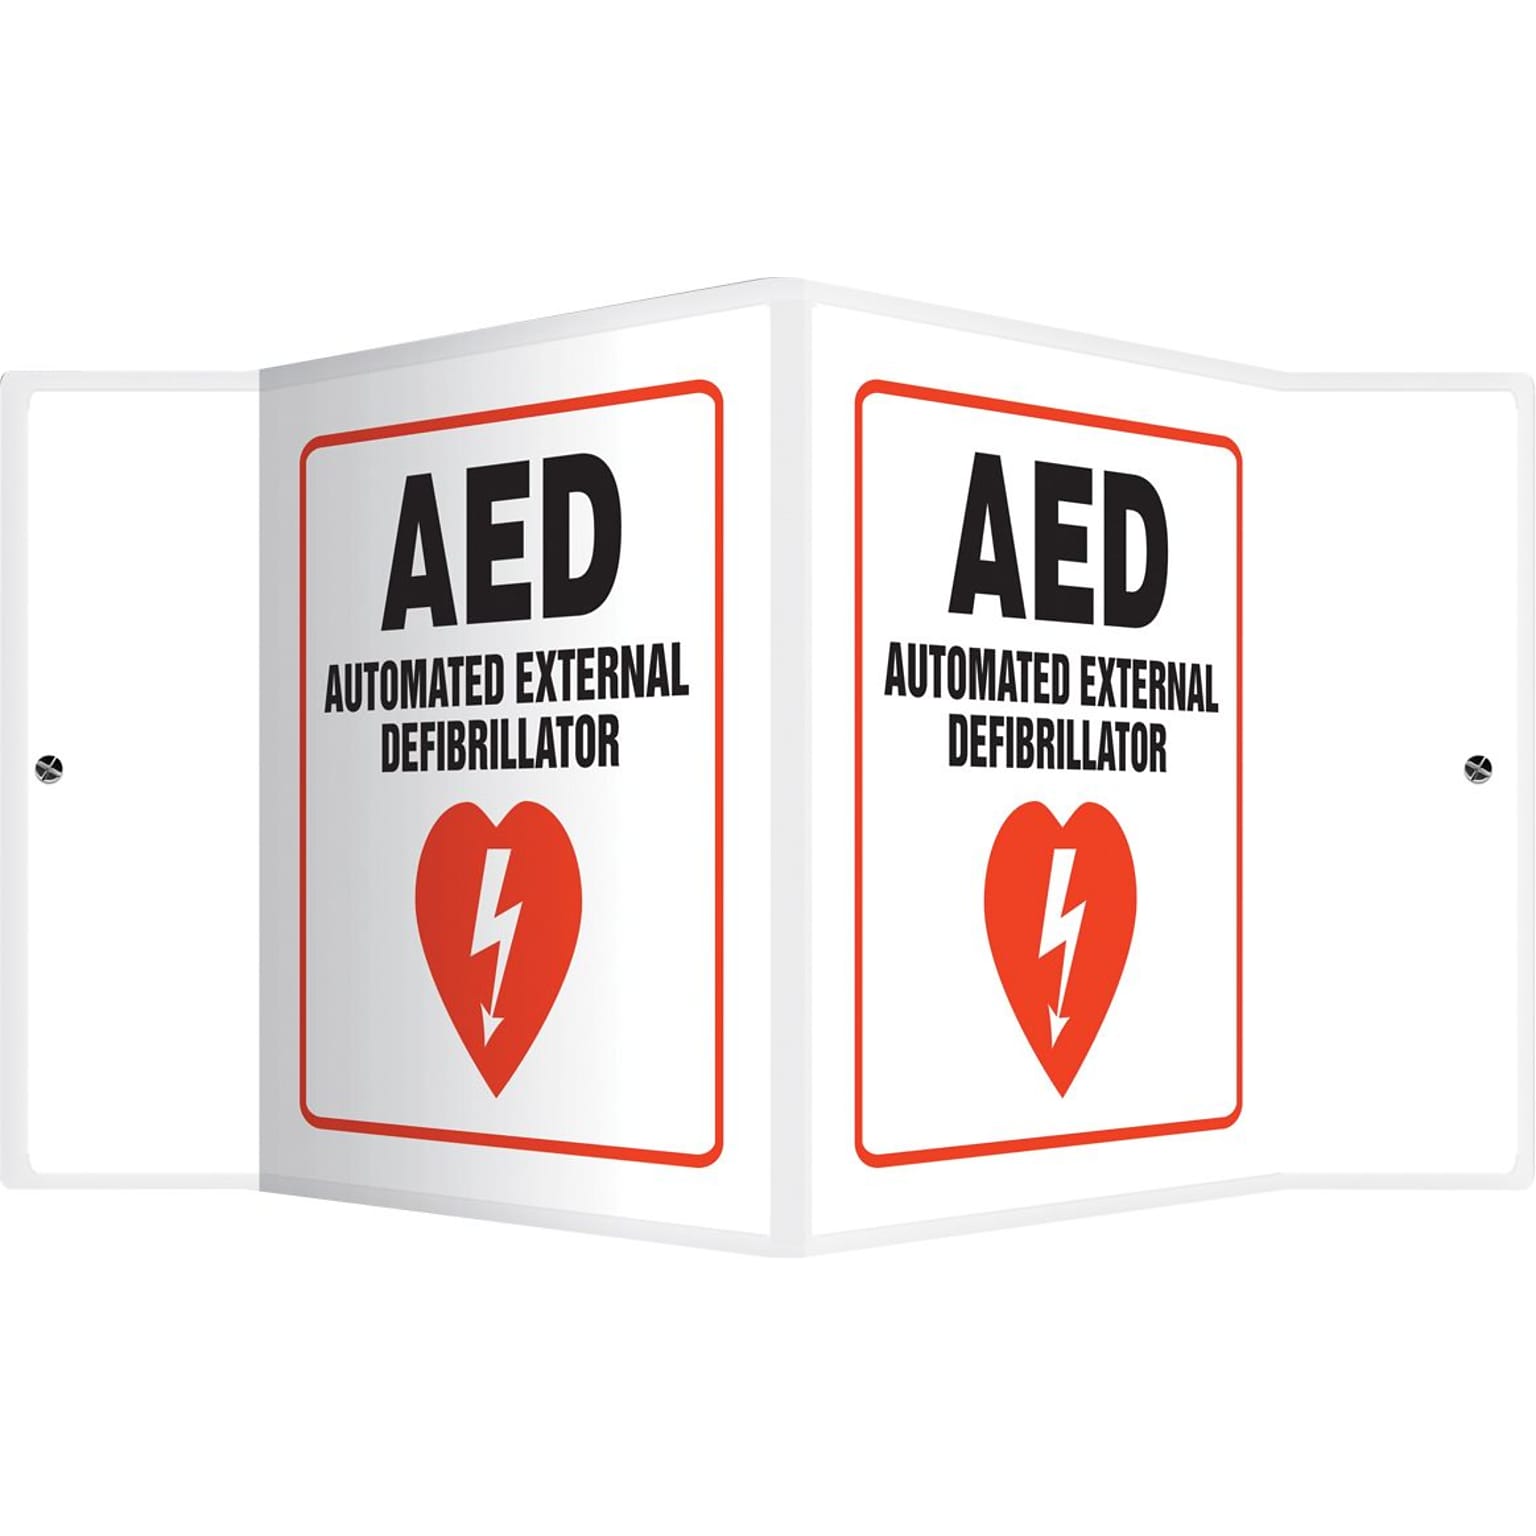 Accuform AED Automated External Defibrillator Projection Sign, Red/Black/White, 6H x 5W (PSP610)